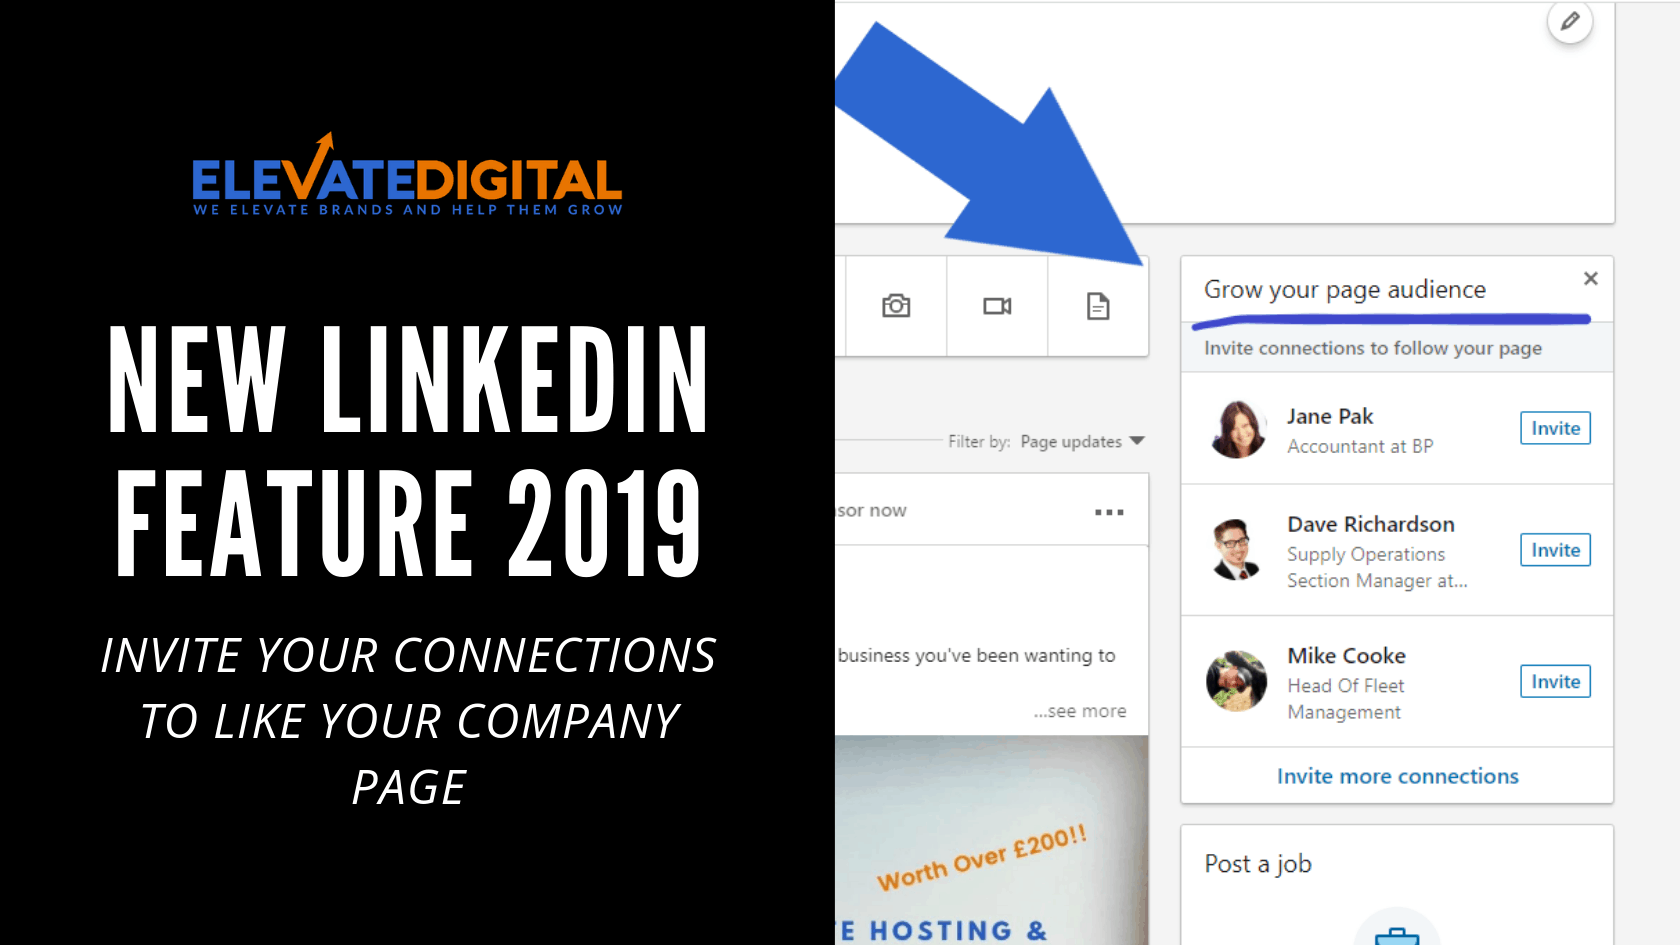 Blog Image Showing New Linkedin Feature